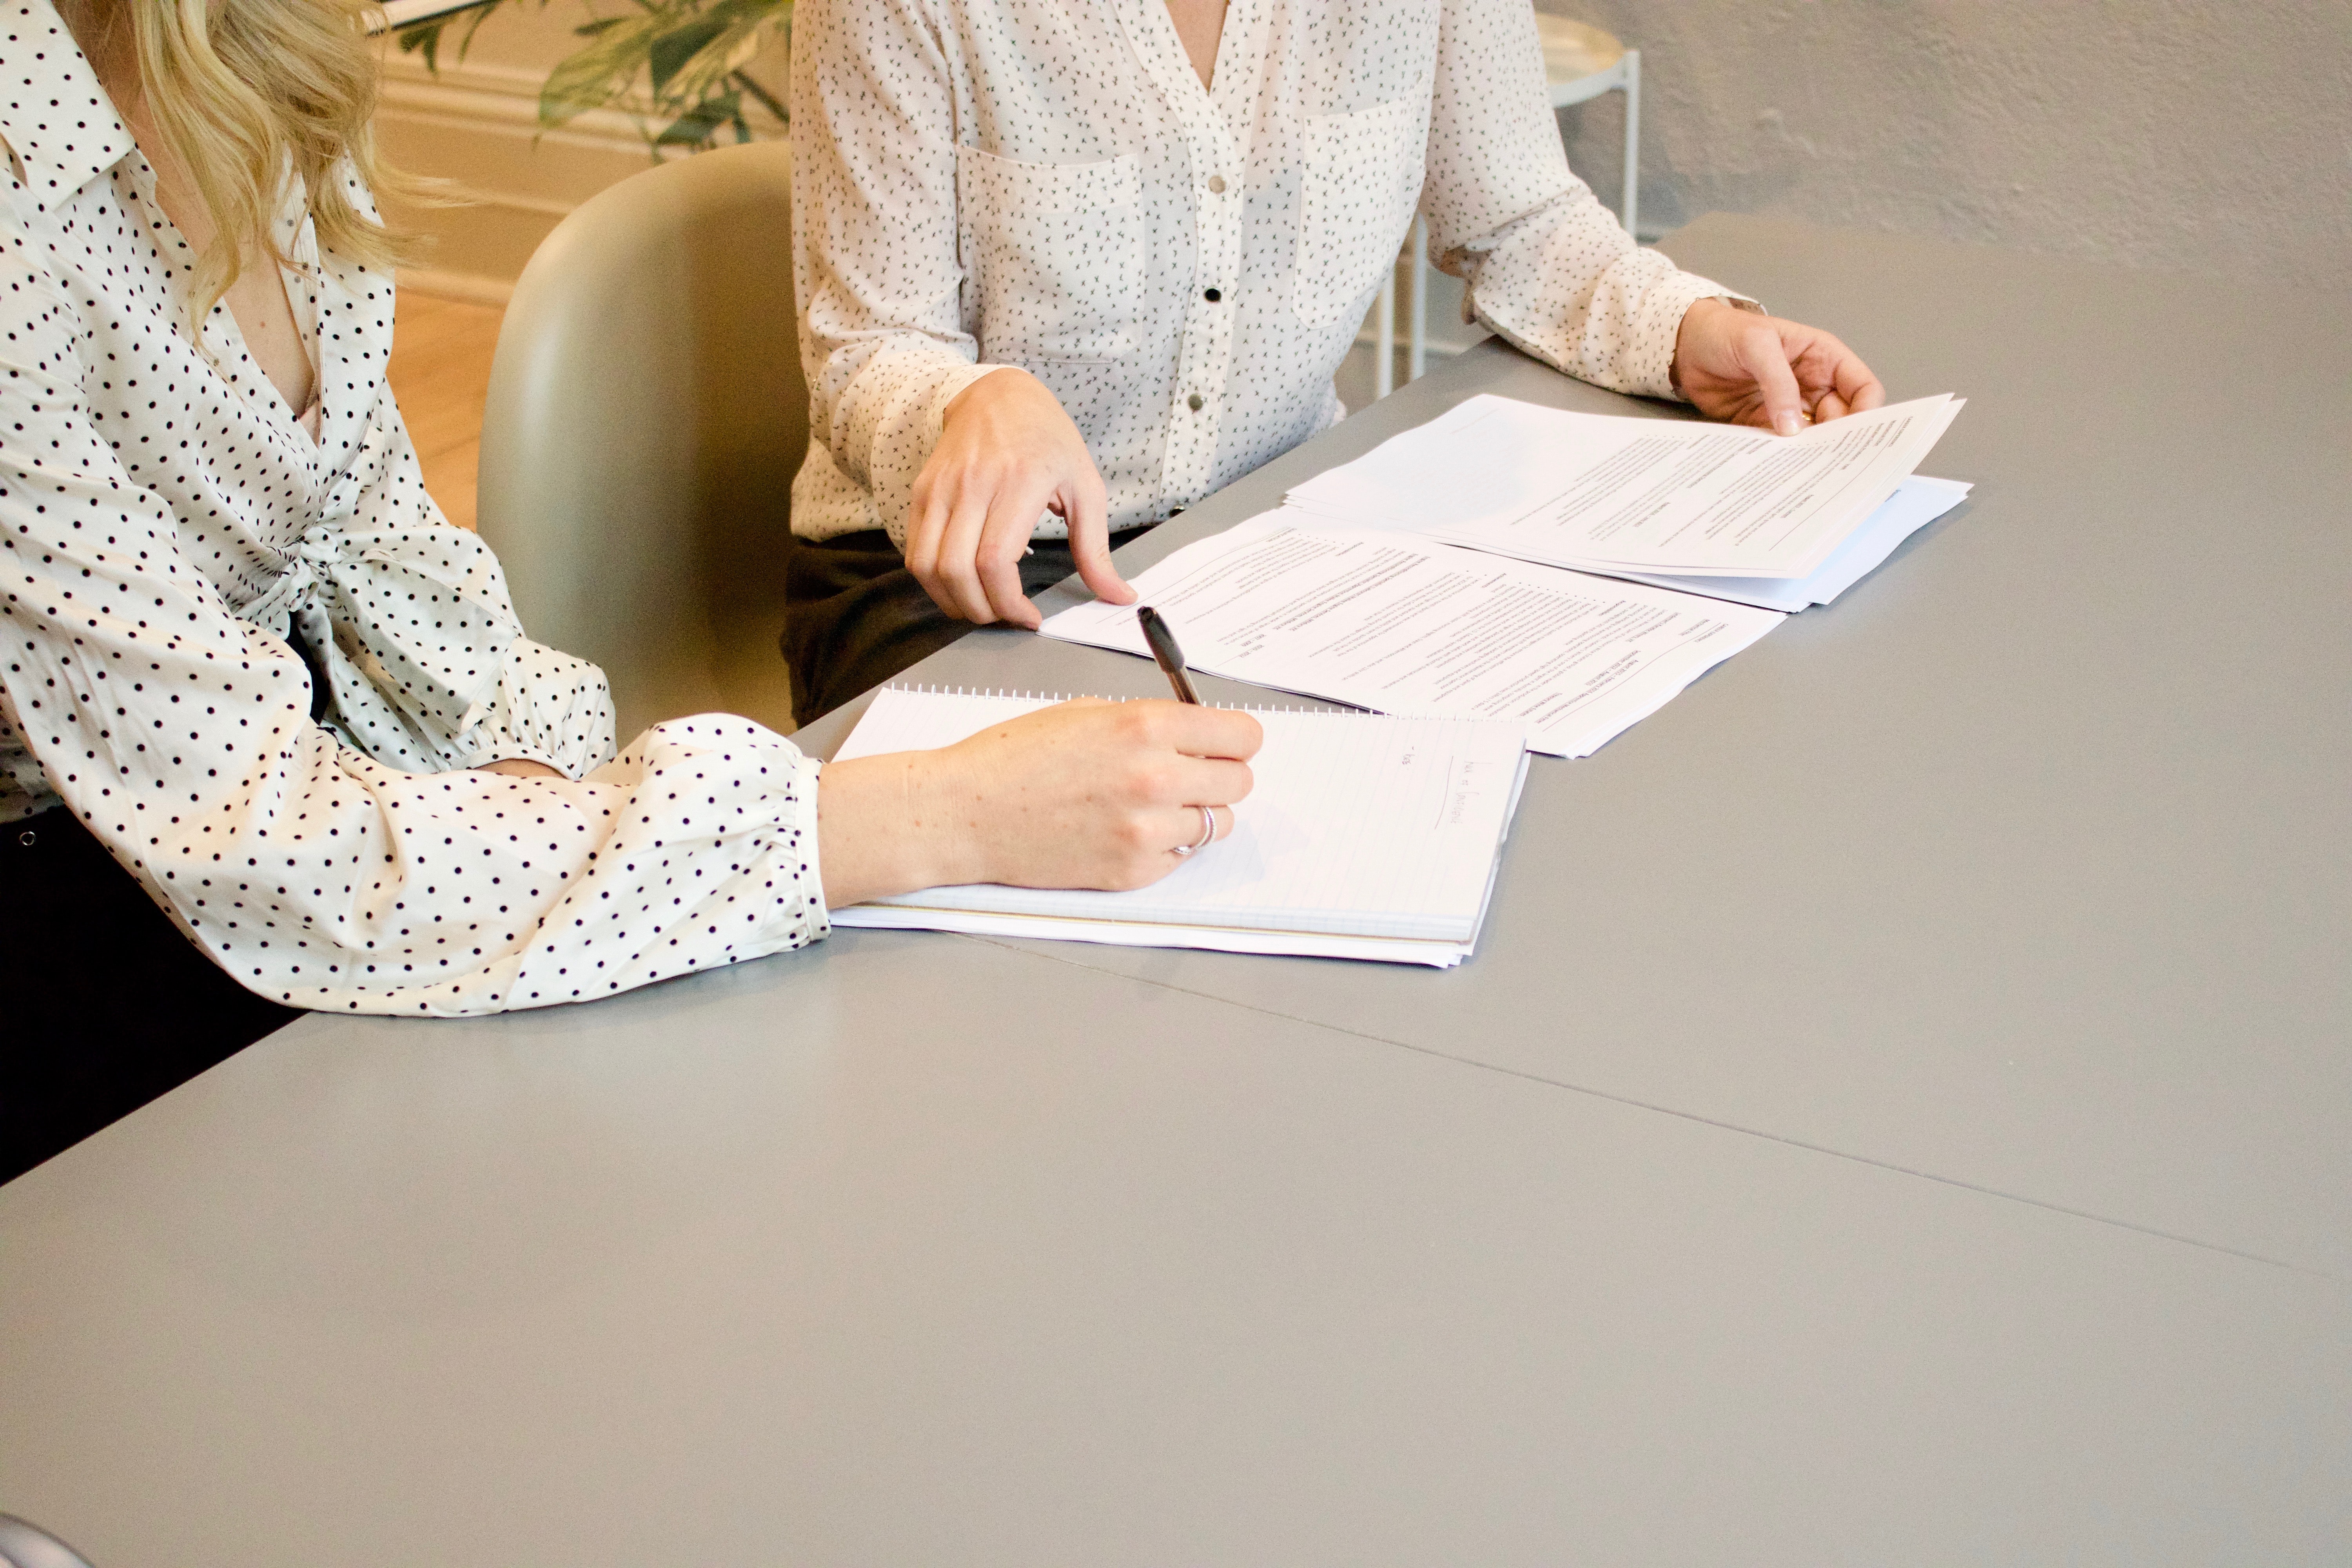 two professional women collaborating in an office setting